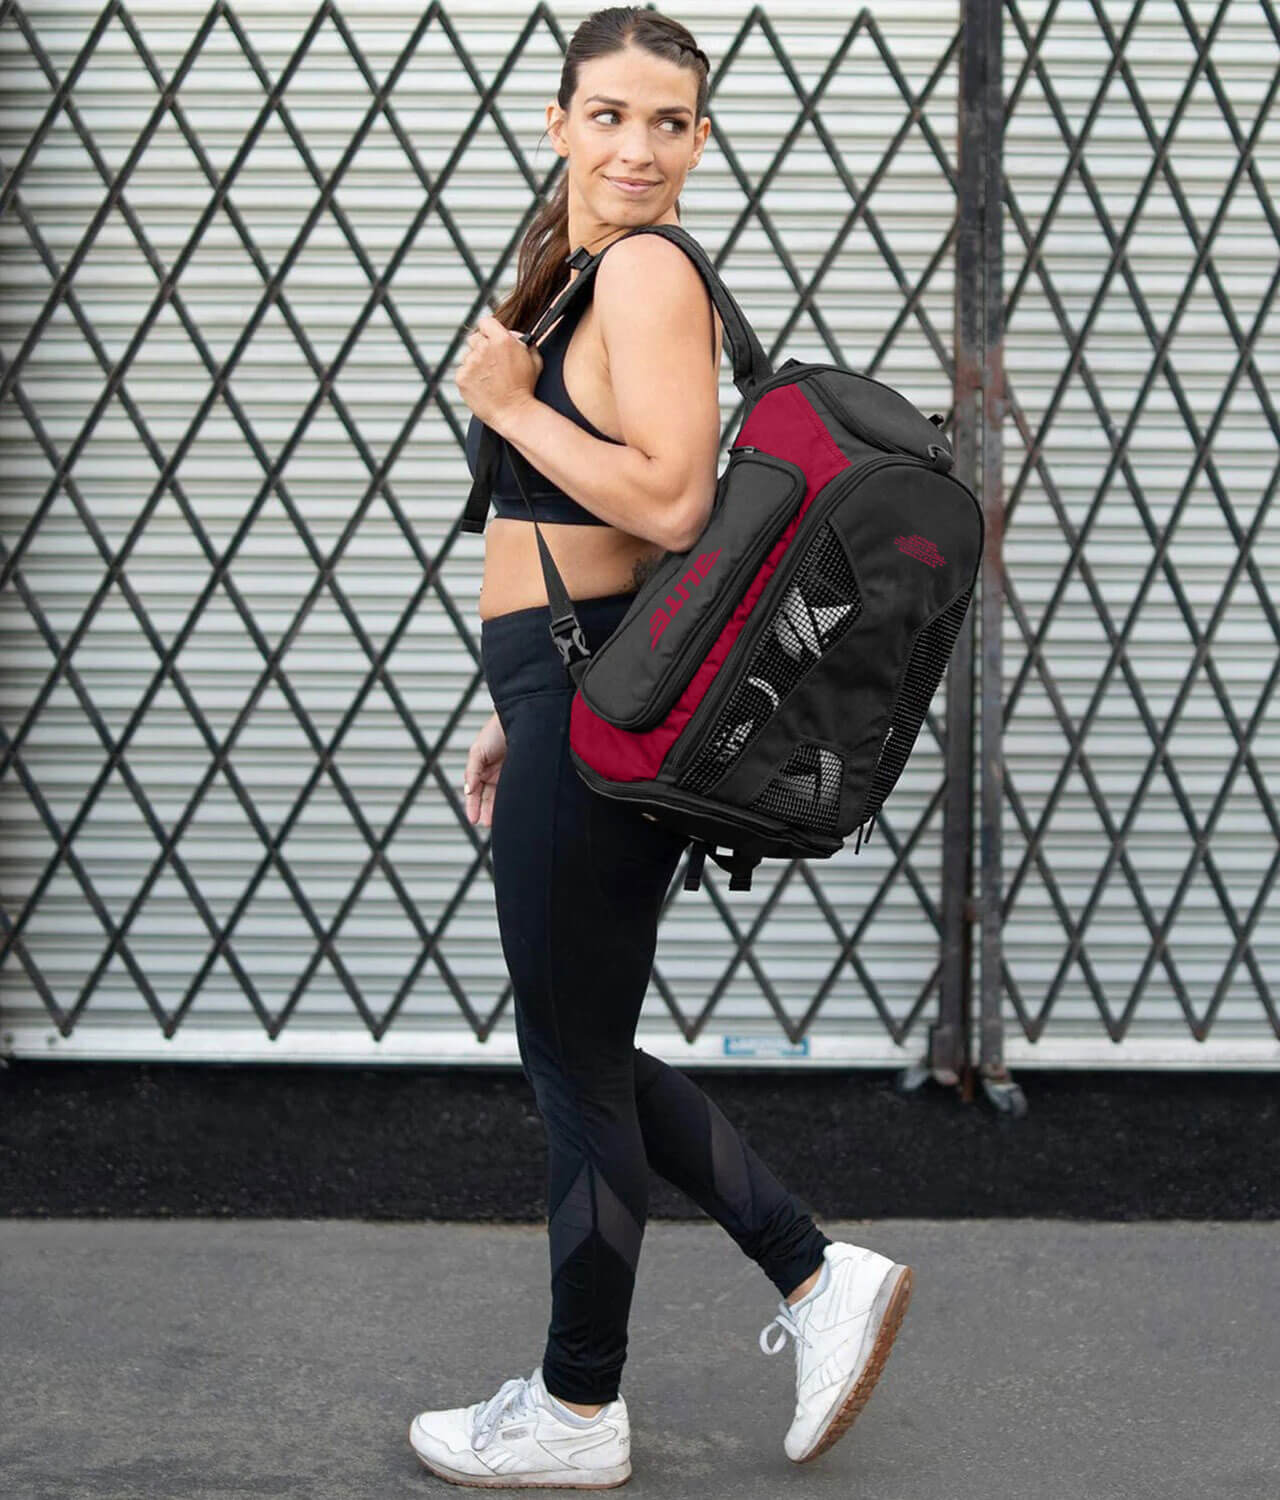 Convertible Red Crossfit Gear Gym Bag & Backpack